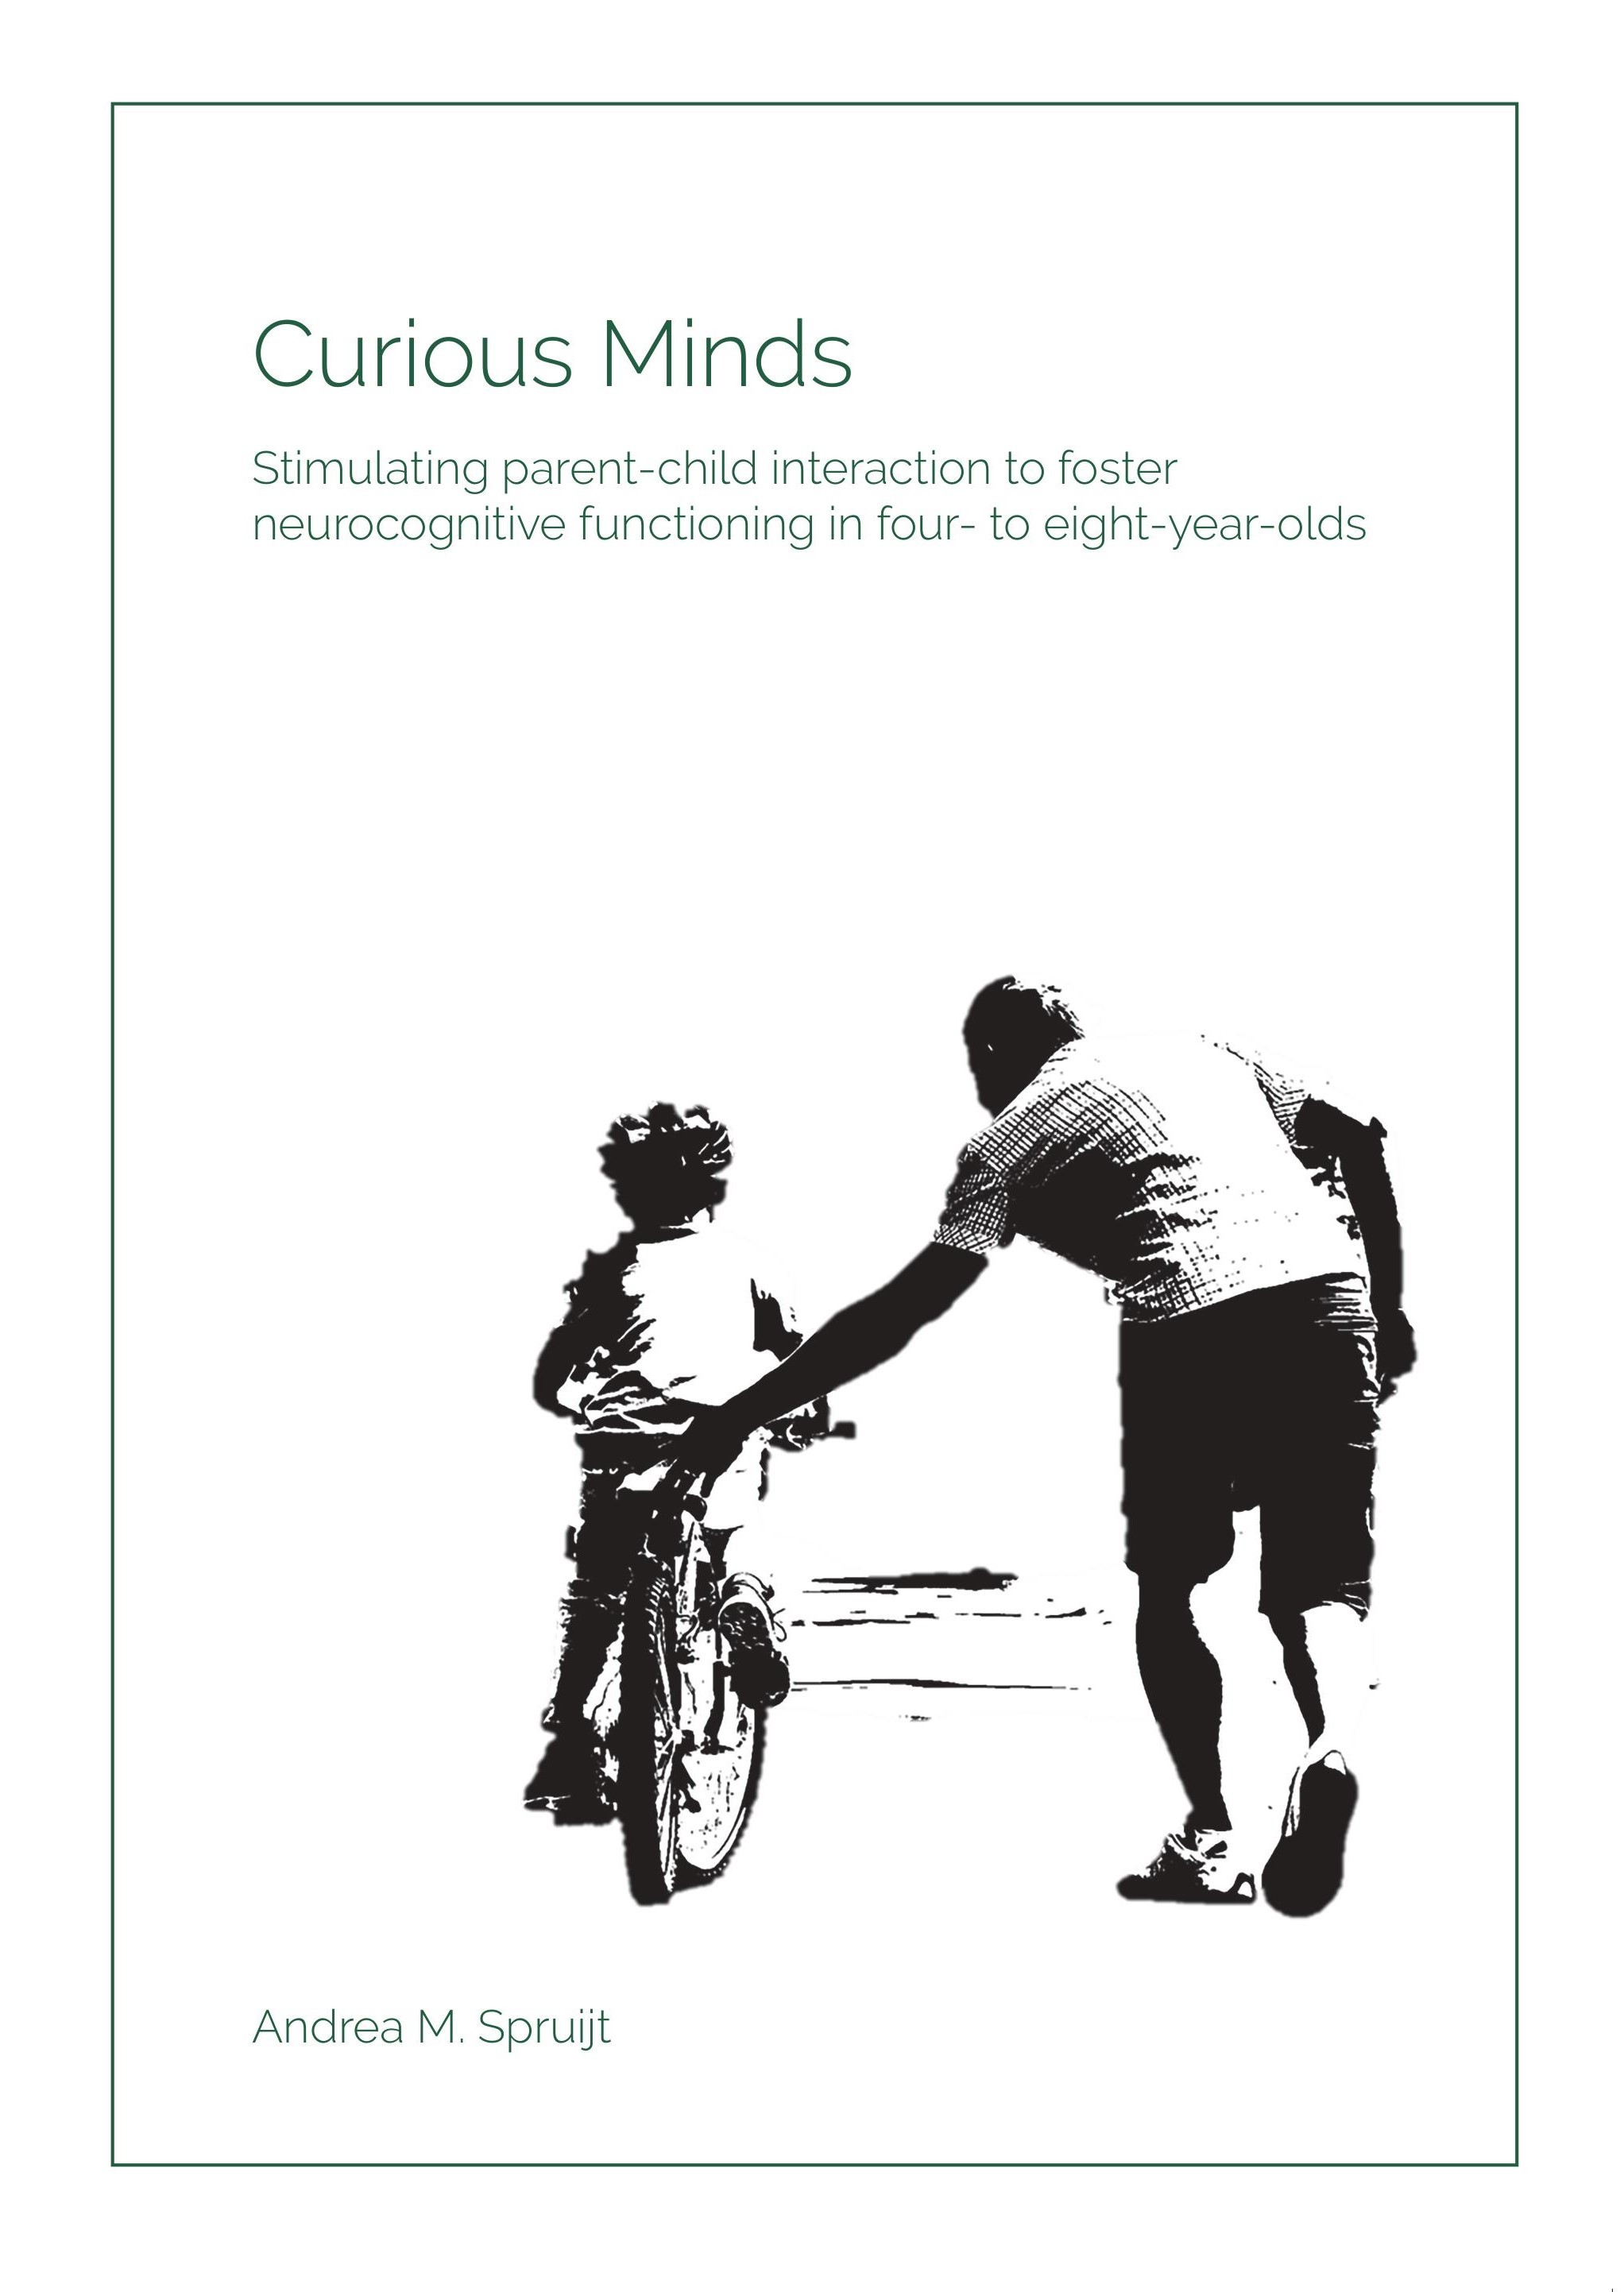 Curious minds: stimulating parent-child interaction to foster neurocognitive functioning in four- to eight-year-olds door Andrea M. Spruijt